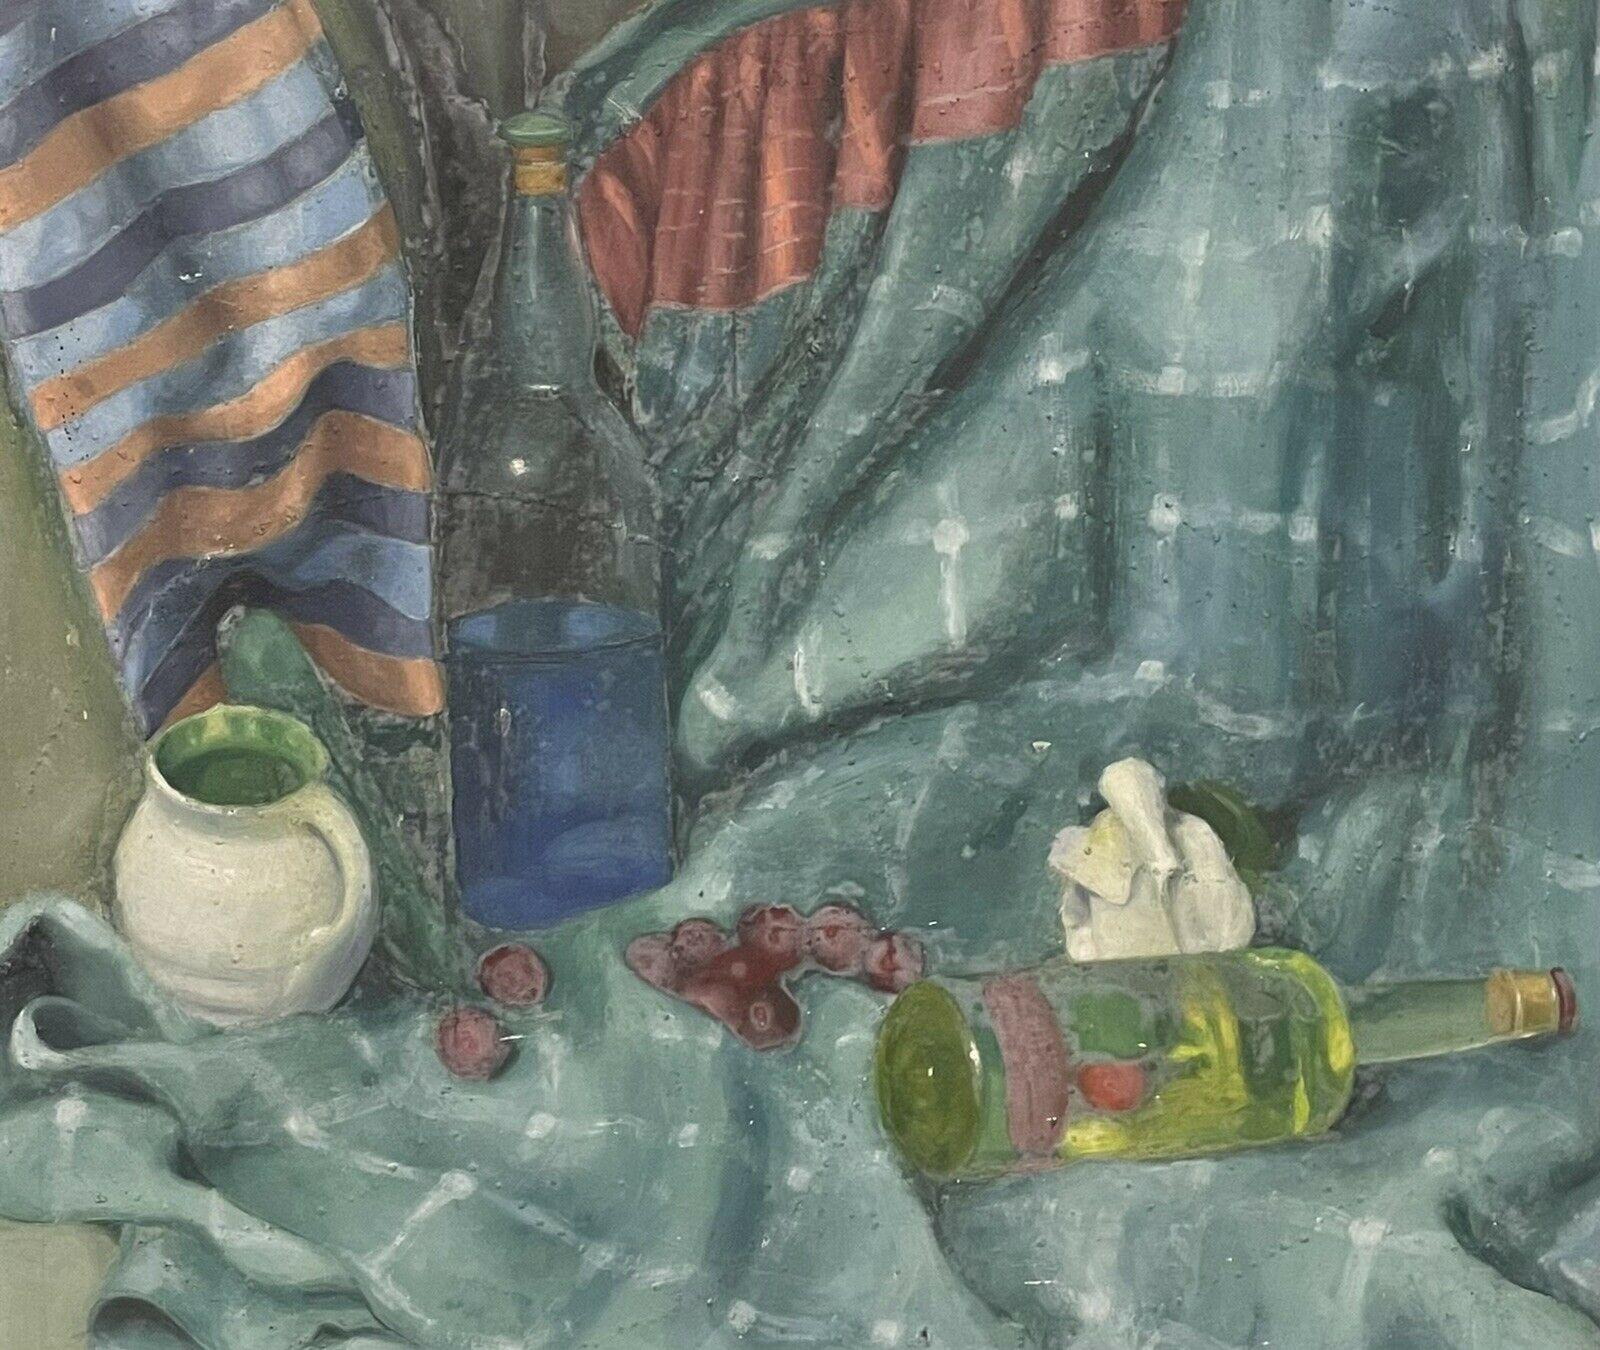 Artist/ School: English School, 20th century

Title: Still life interior scene, with objects against a teal blue/ green backdrop. 

Medium: oil painting on board, framed.

framed: 17.75 x 20.25 inches
canvas:  16 x 18.75 inches

Provenance: private